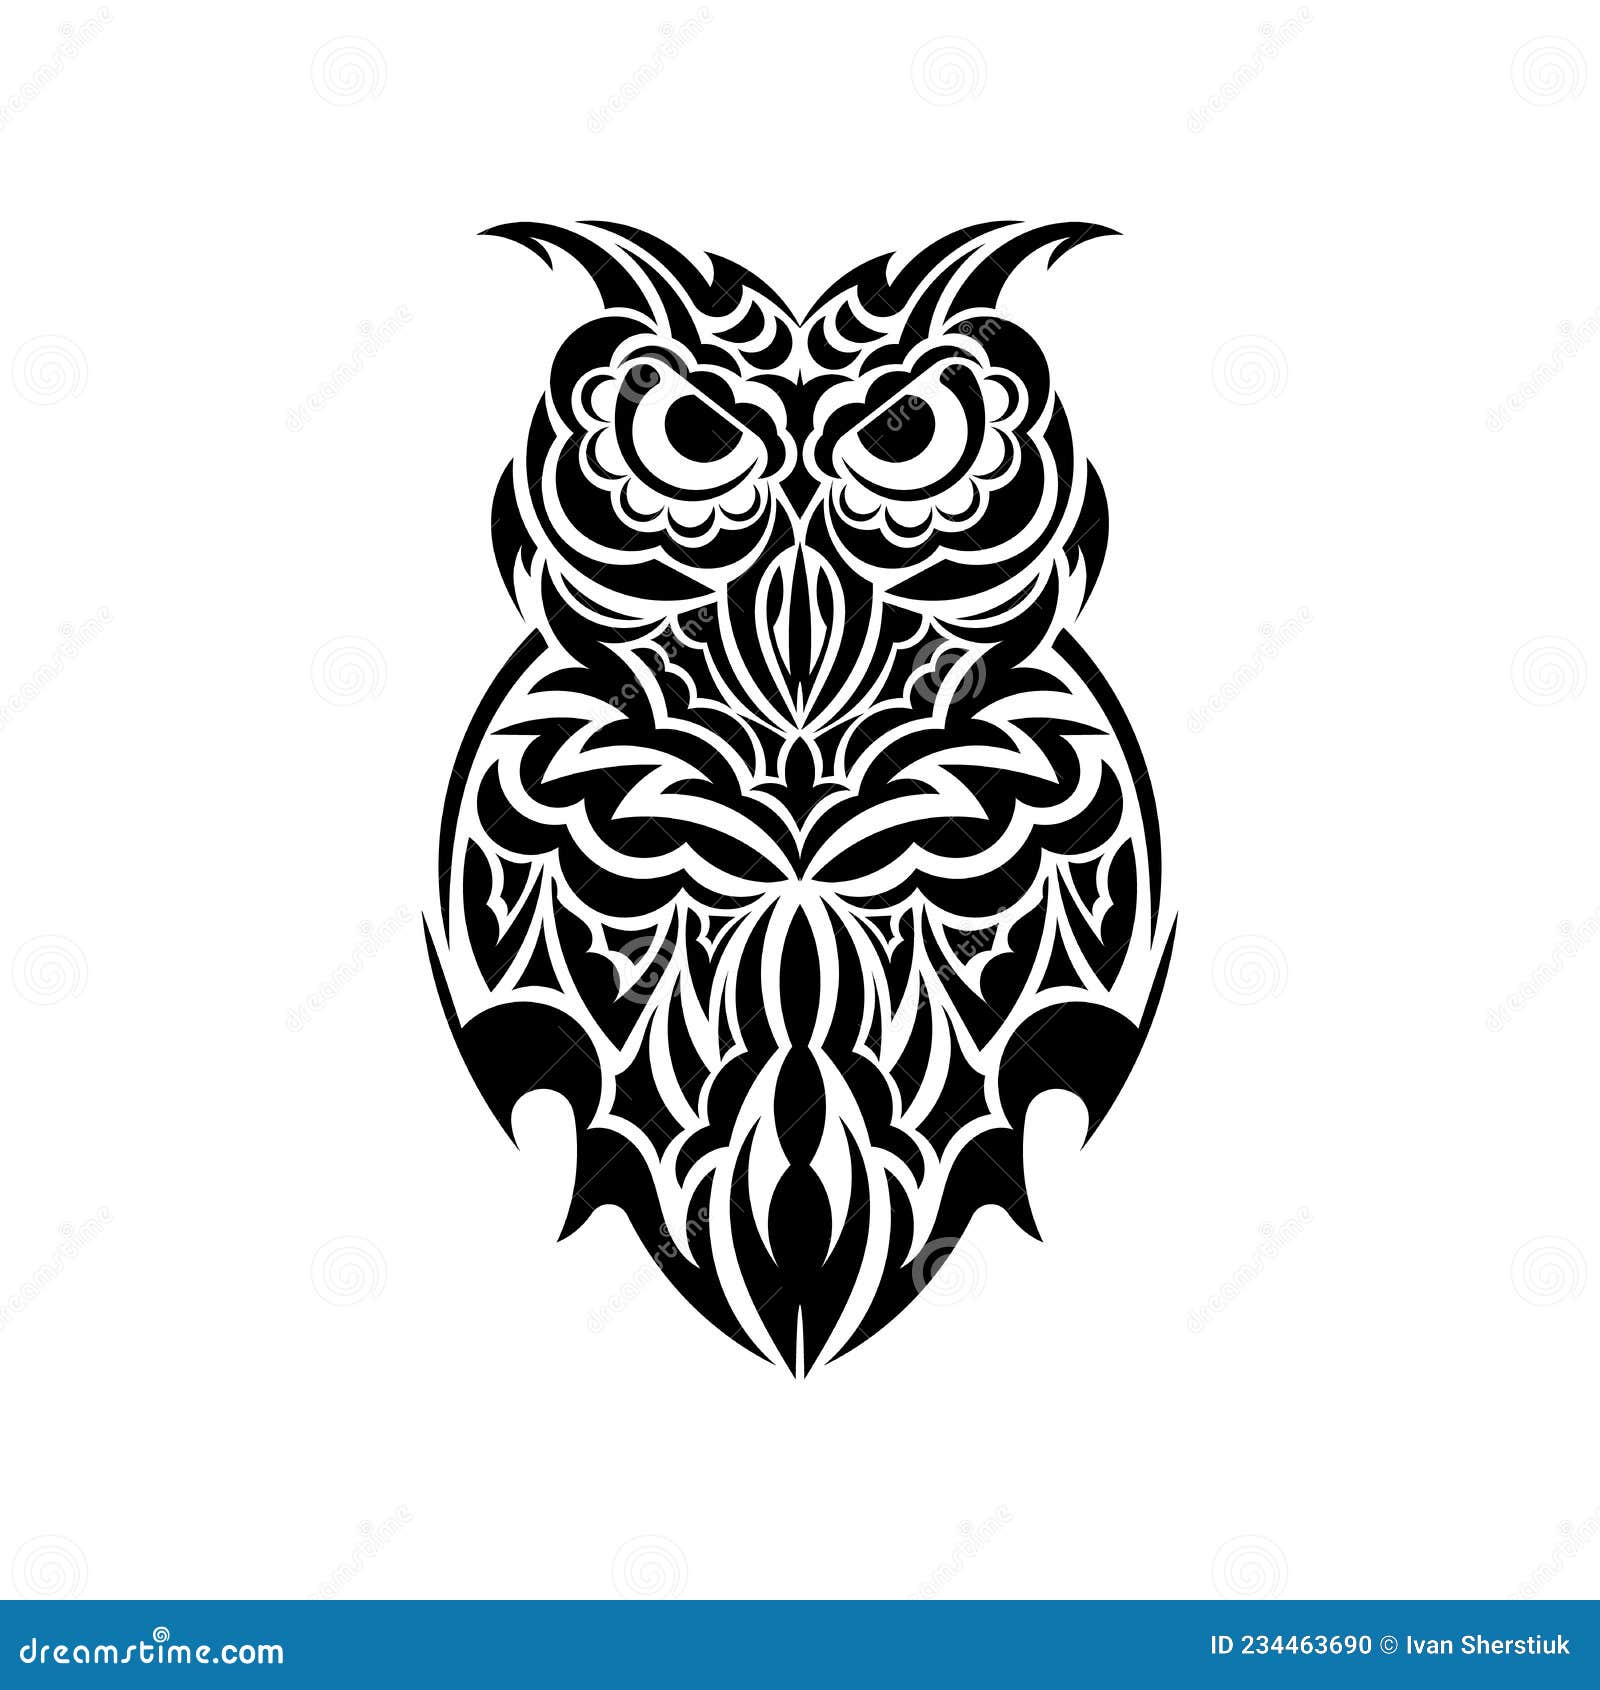 Abstract Reality Owl Tattoo  Best Tattoo Ideas Gallery